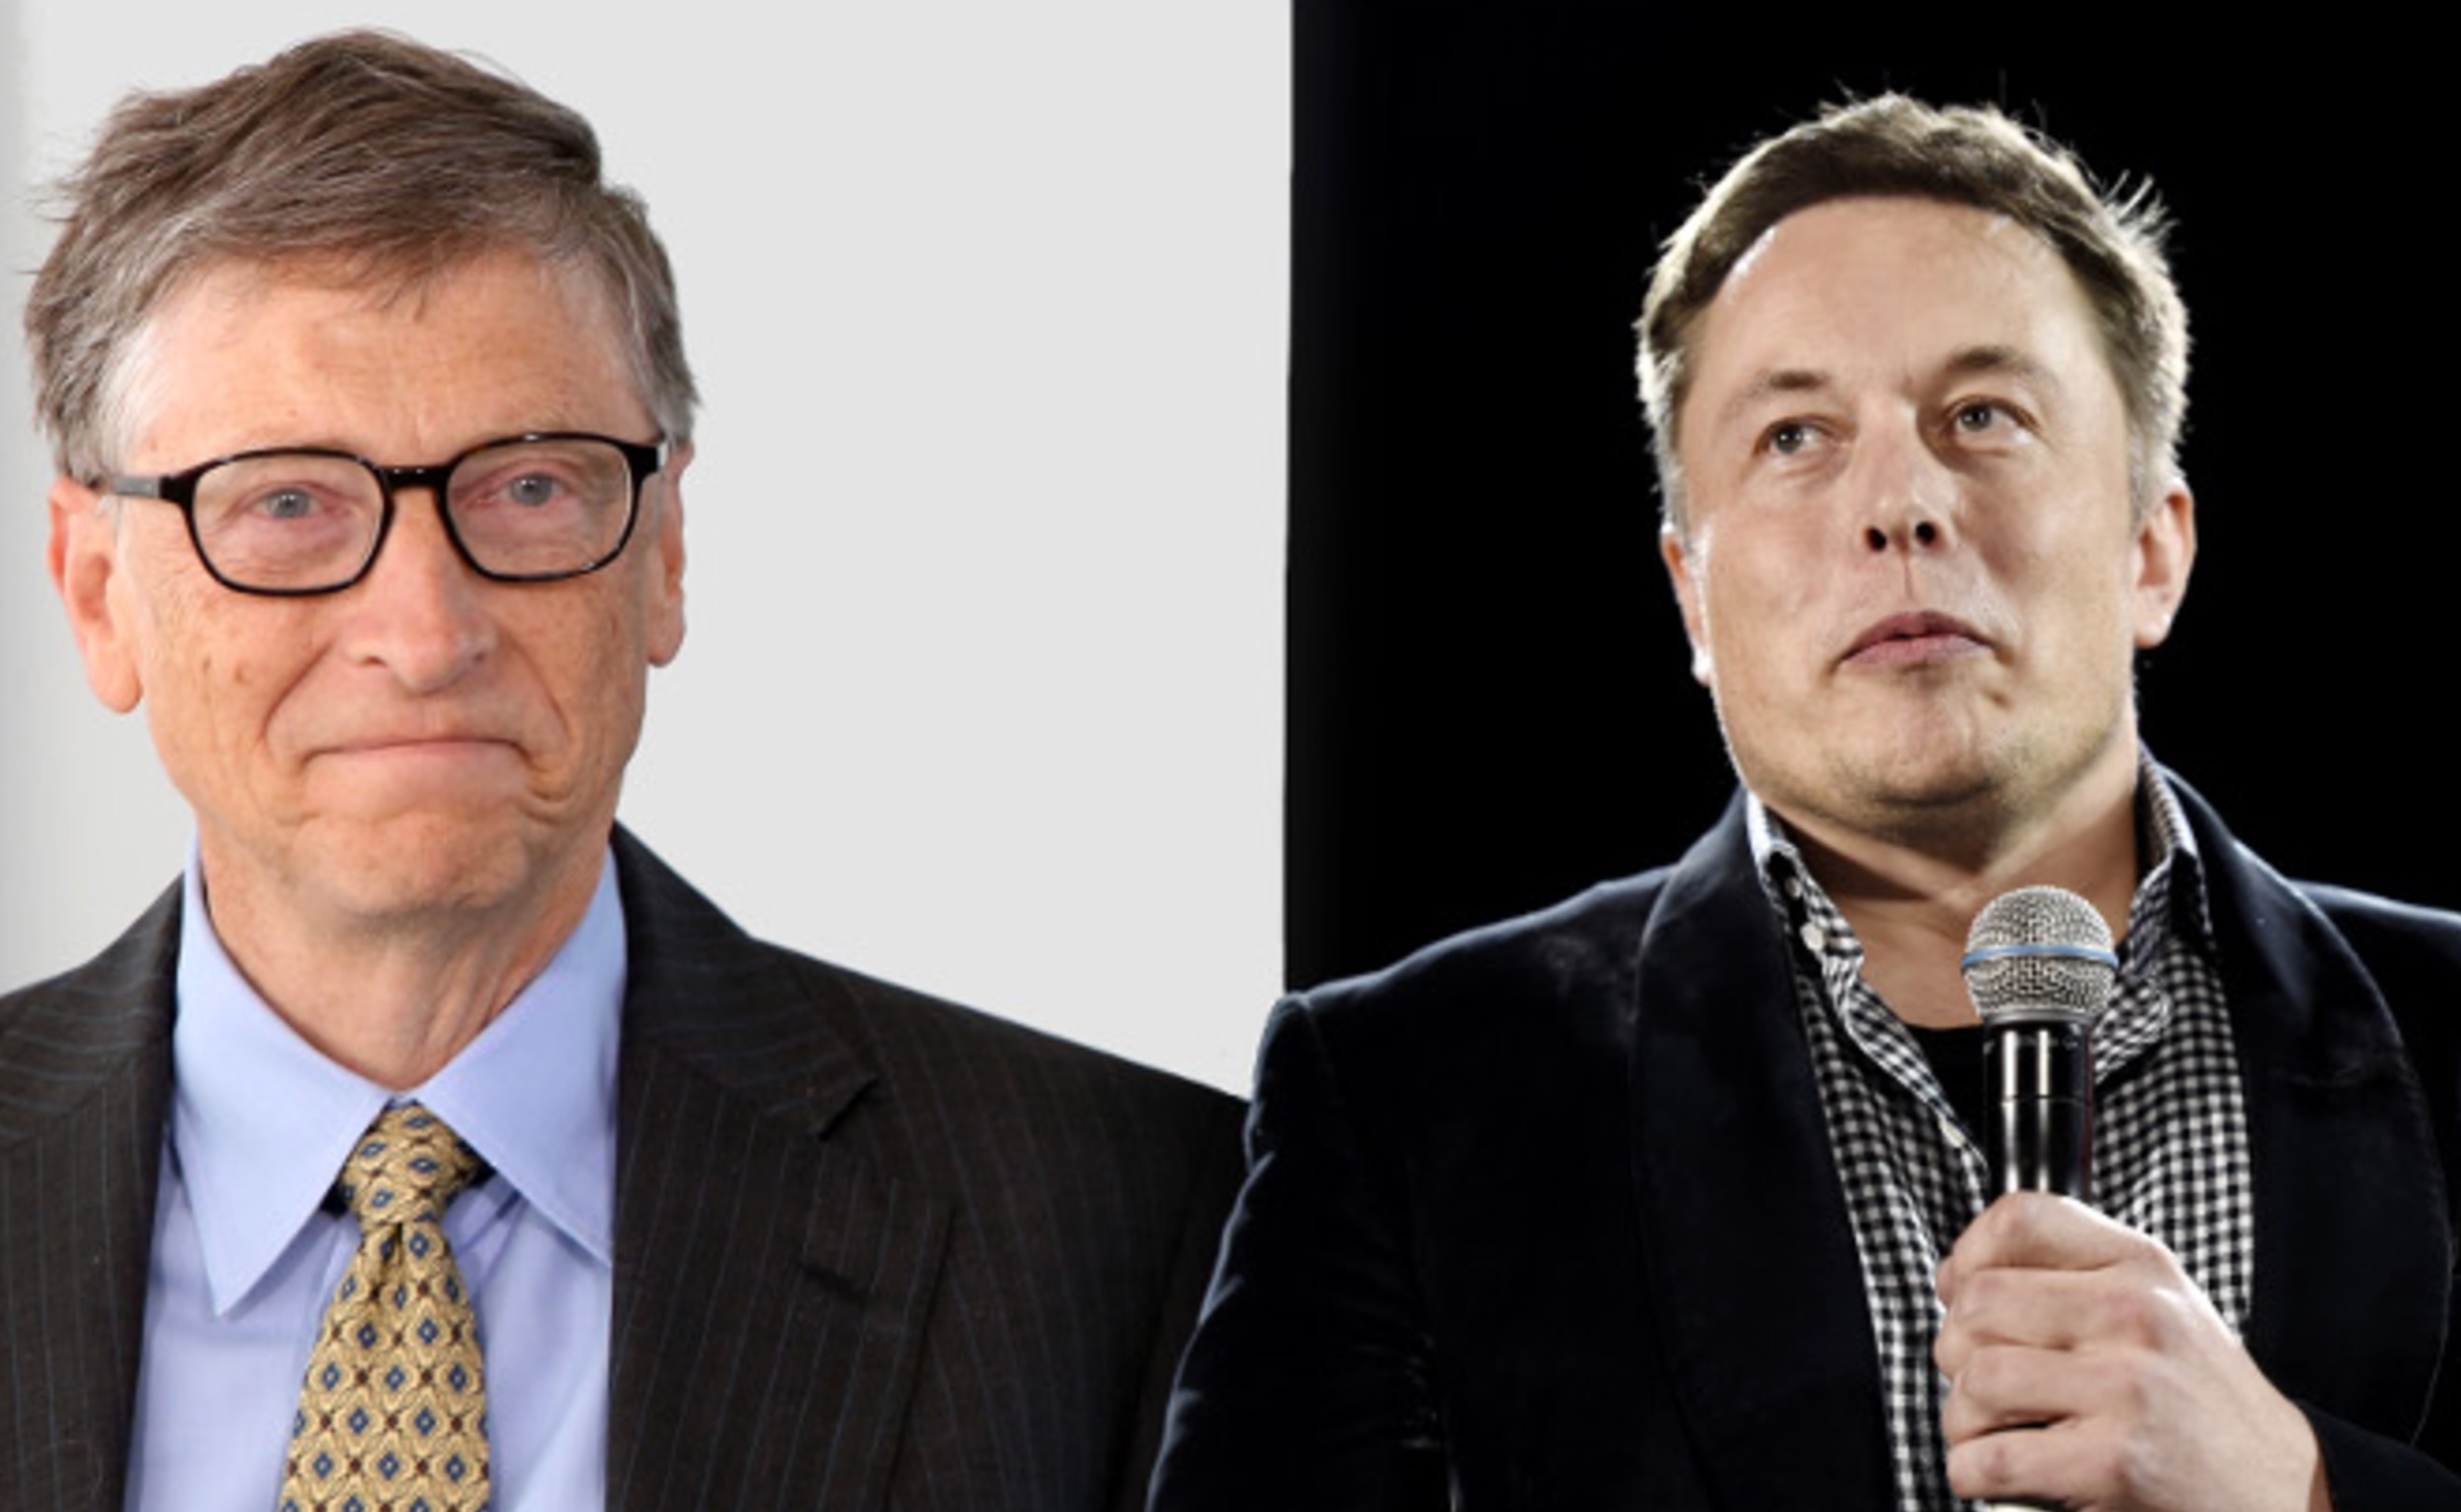 Bill Gates says Elon Musk should spend money for Mars on other things